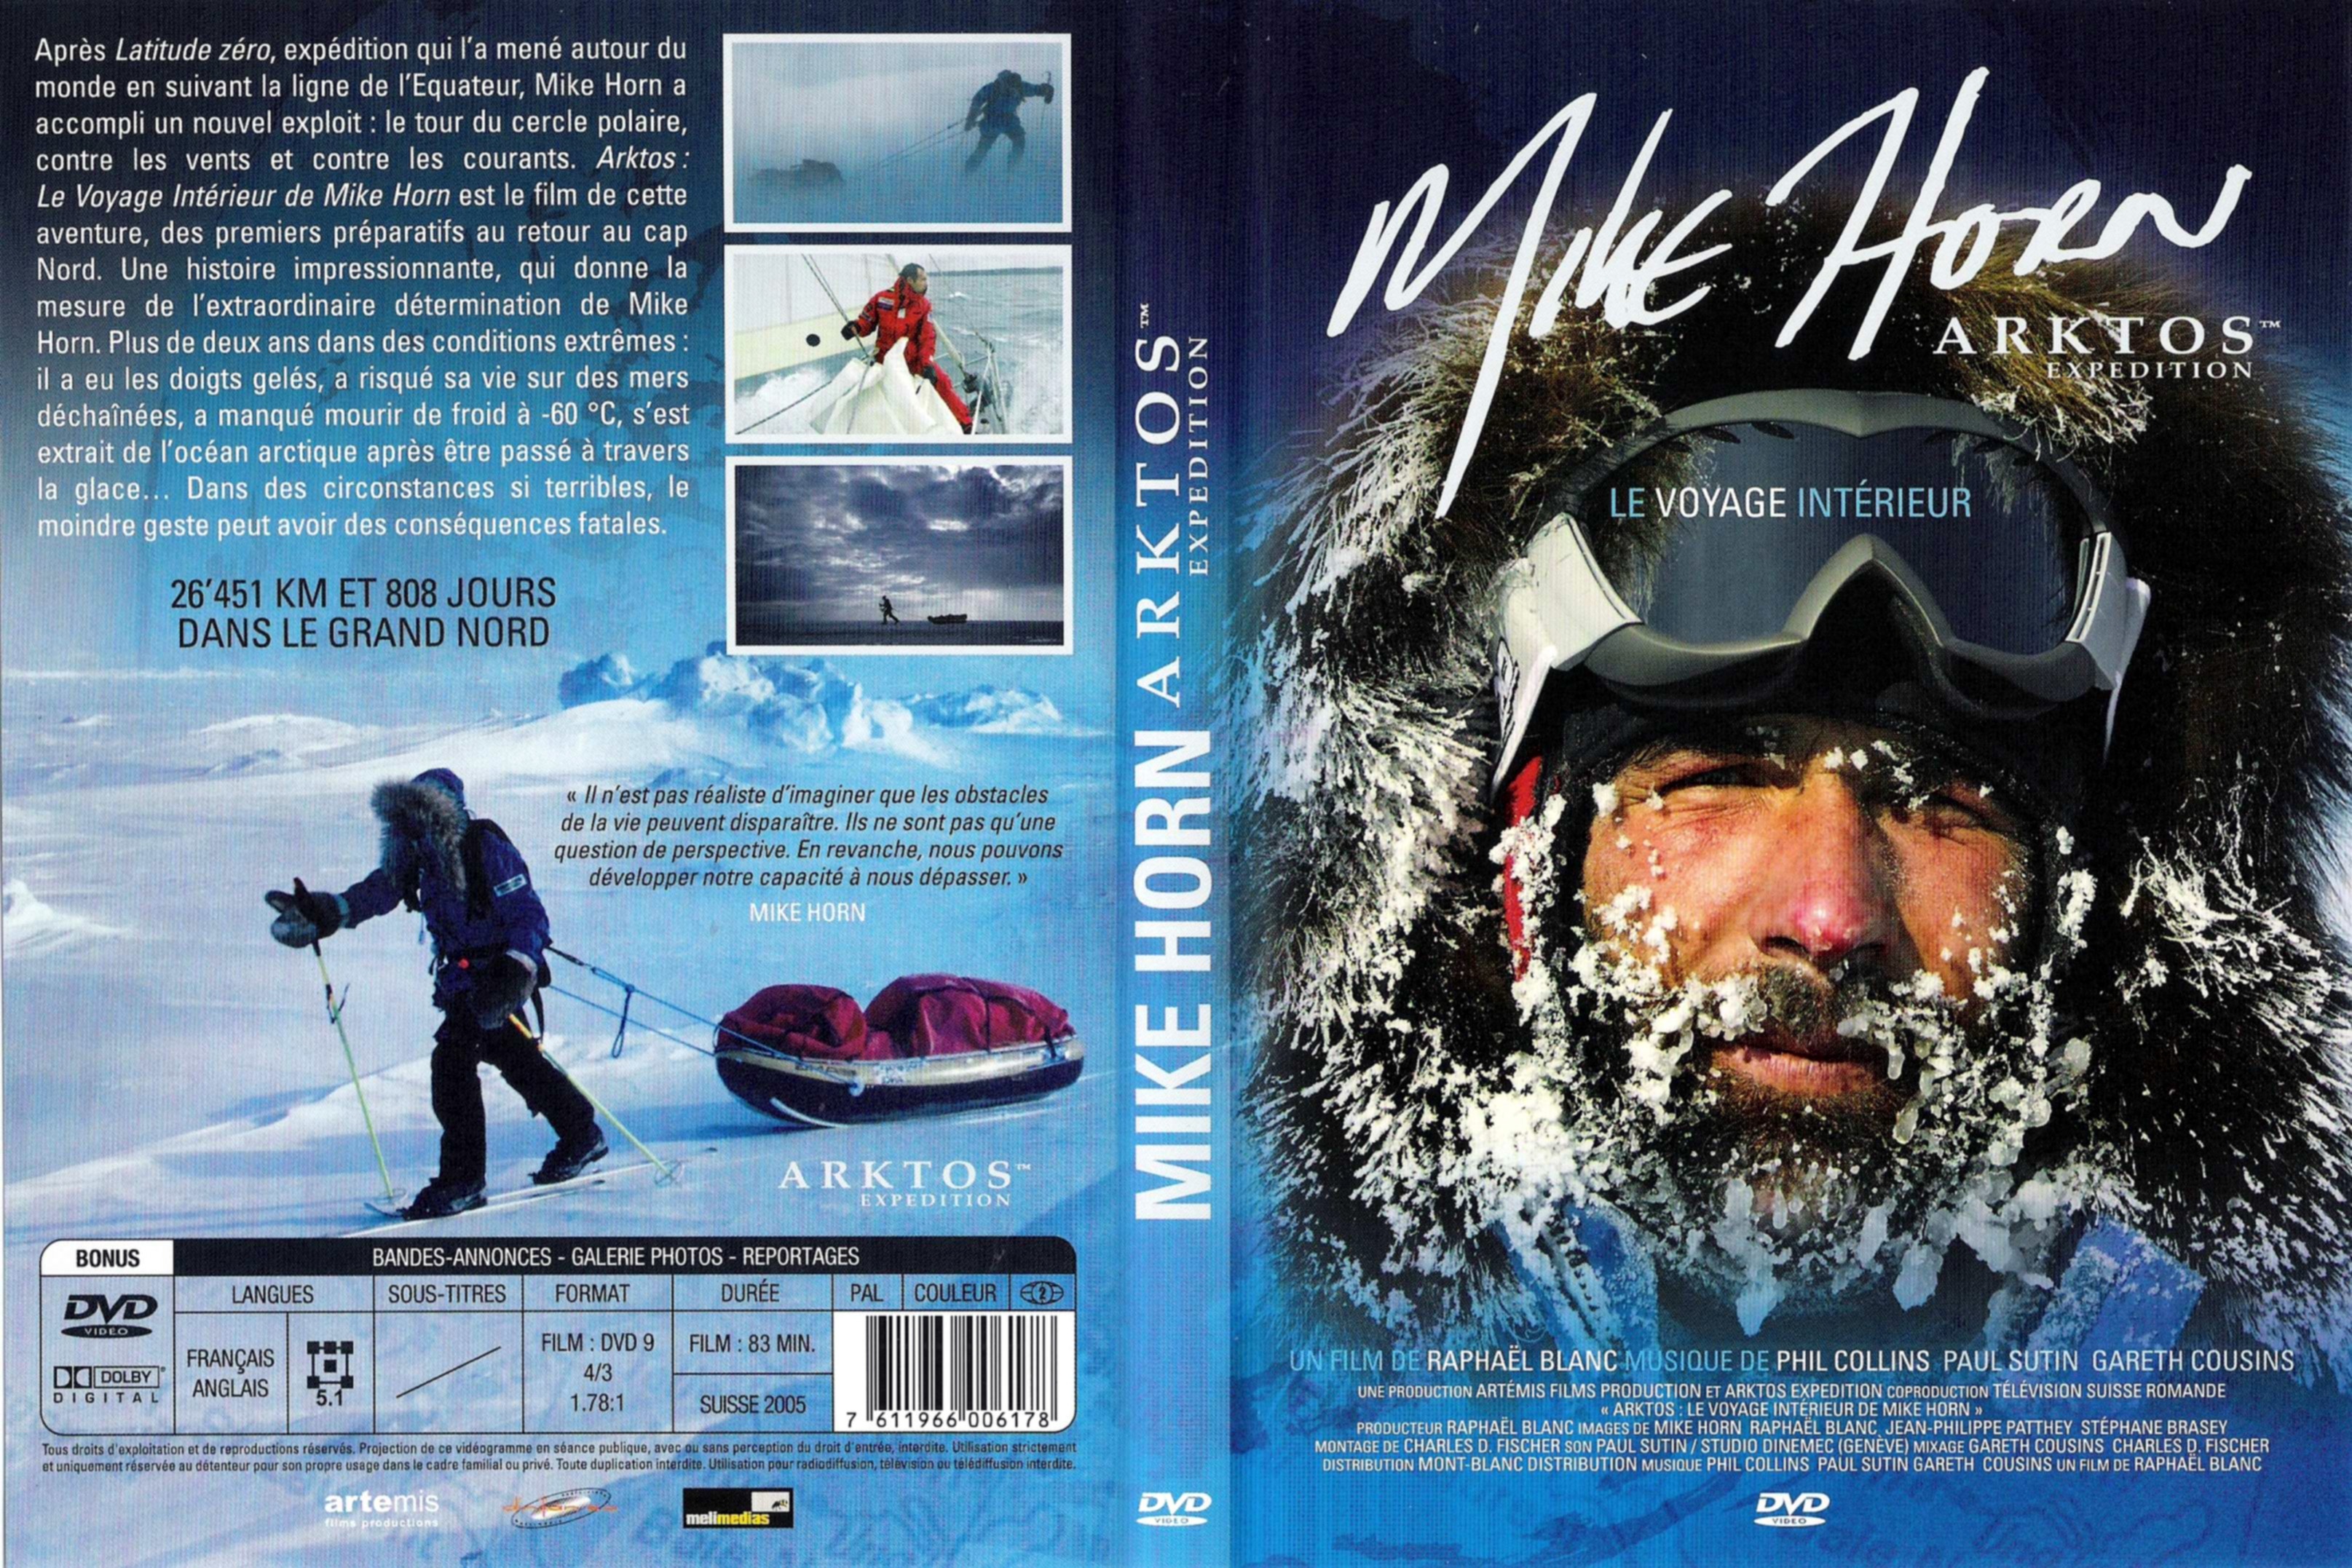 Jaquette DVD Mike Horn Arktos expedition